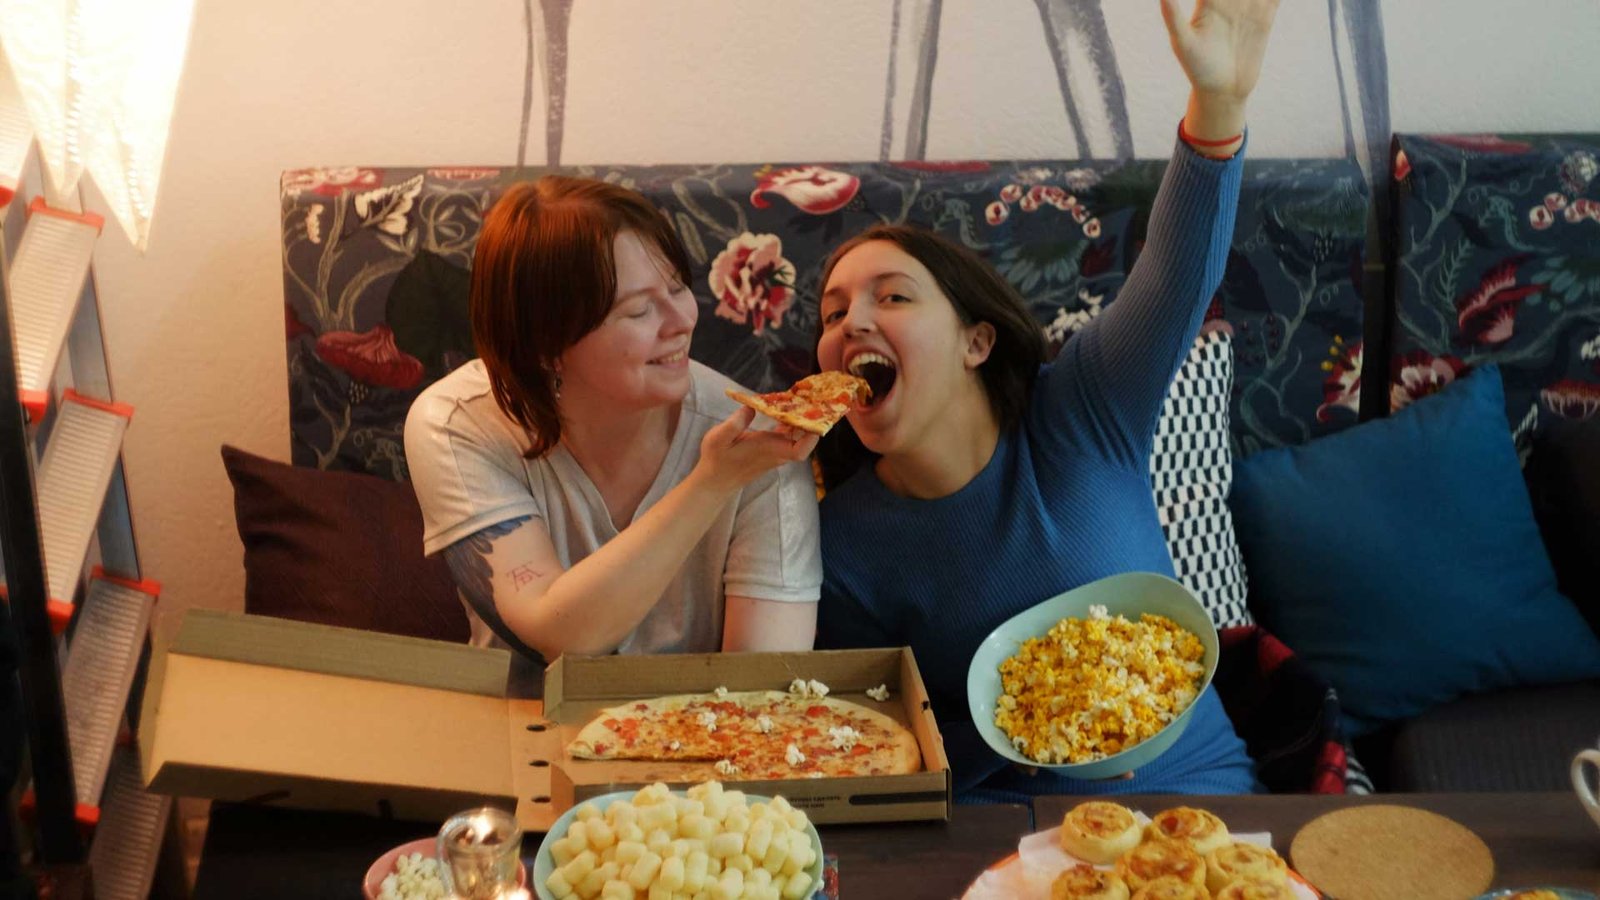 Tips To Make a Plan of an Memorable Pizza Party